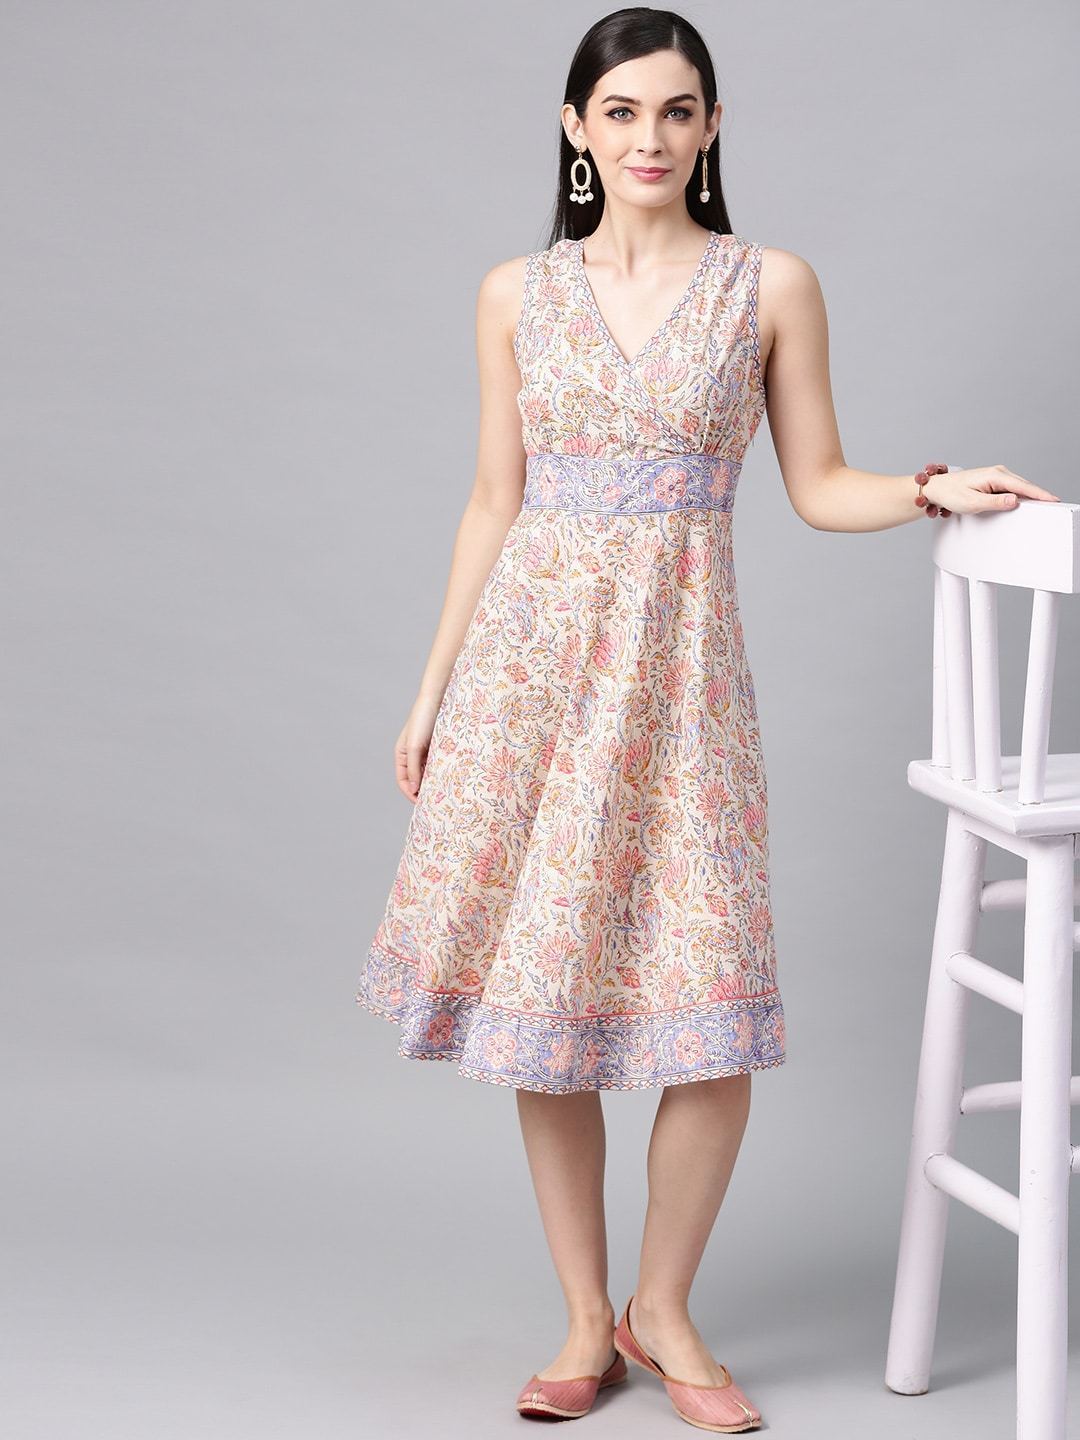 Women's  Off-White & Pink Printed Fit and Flare Dress - AKS